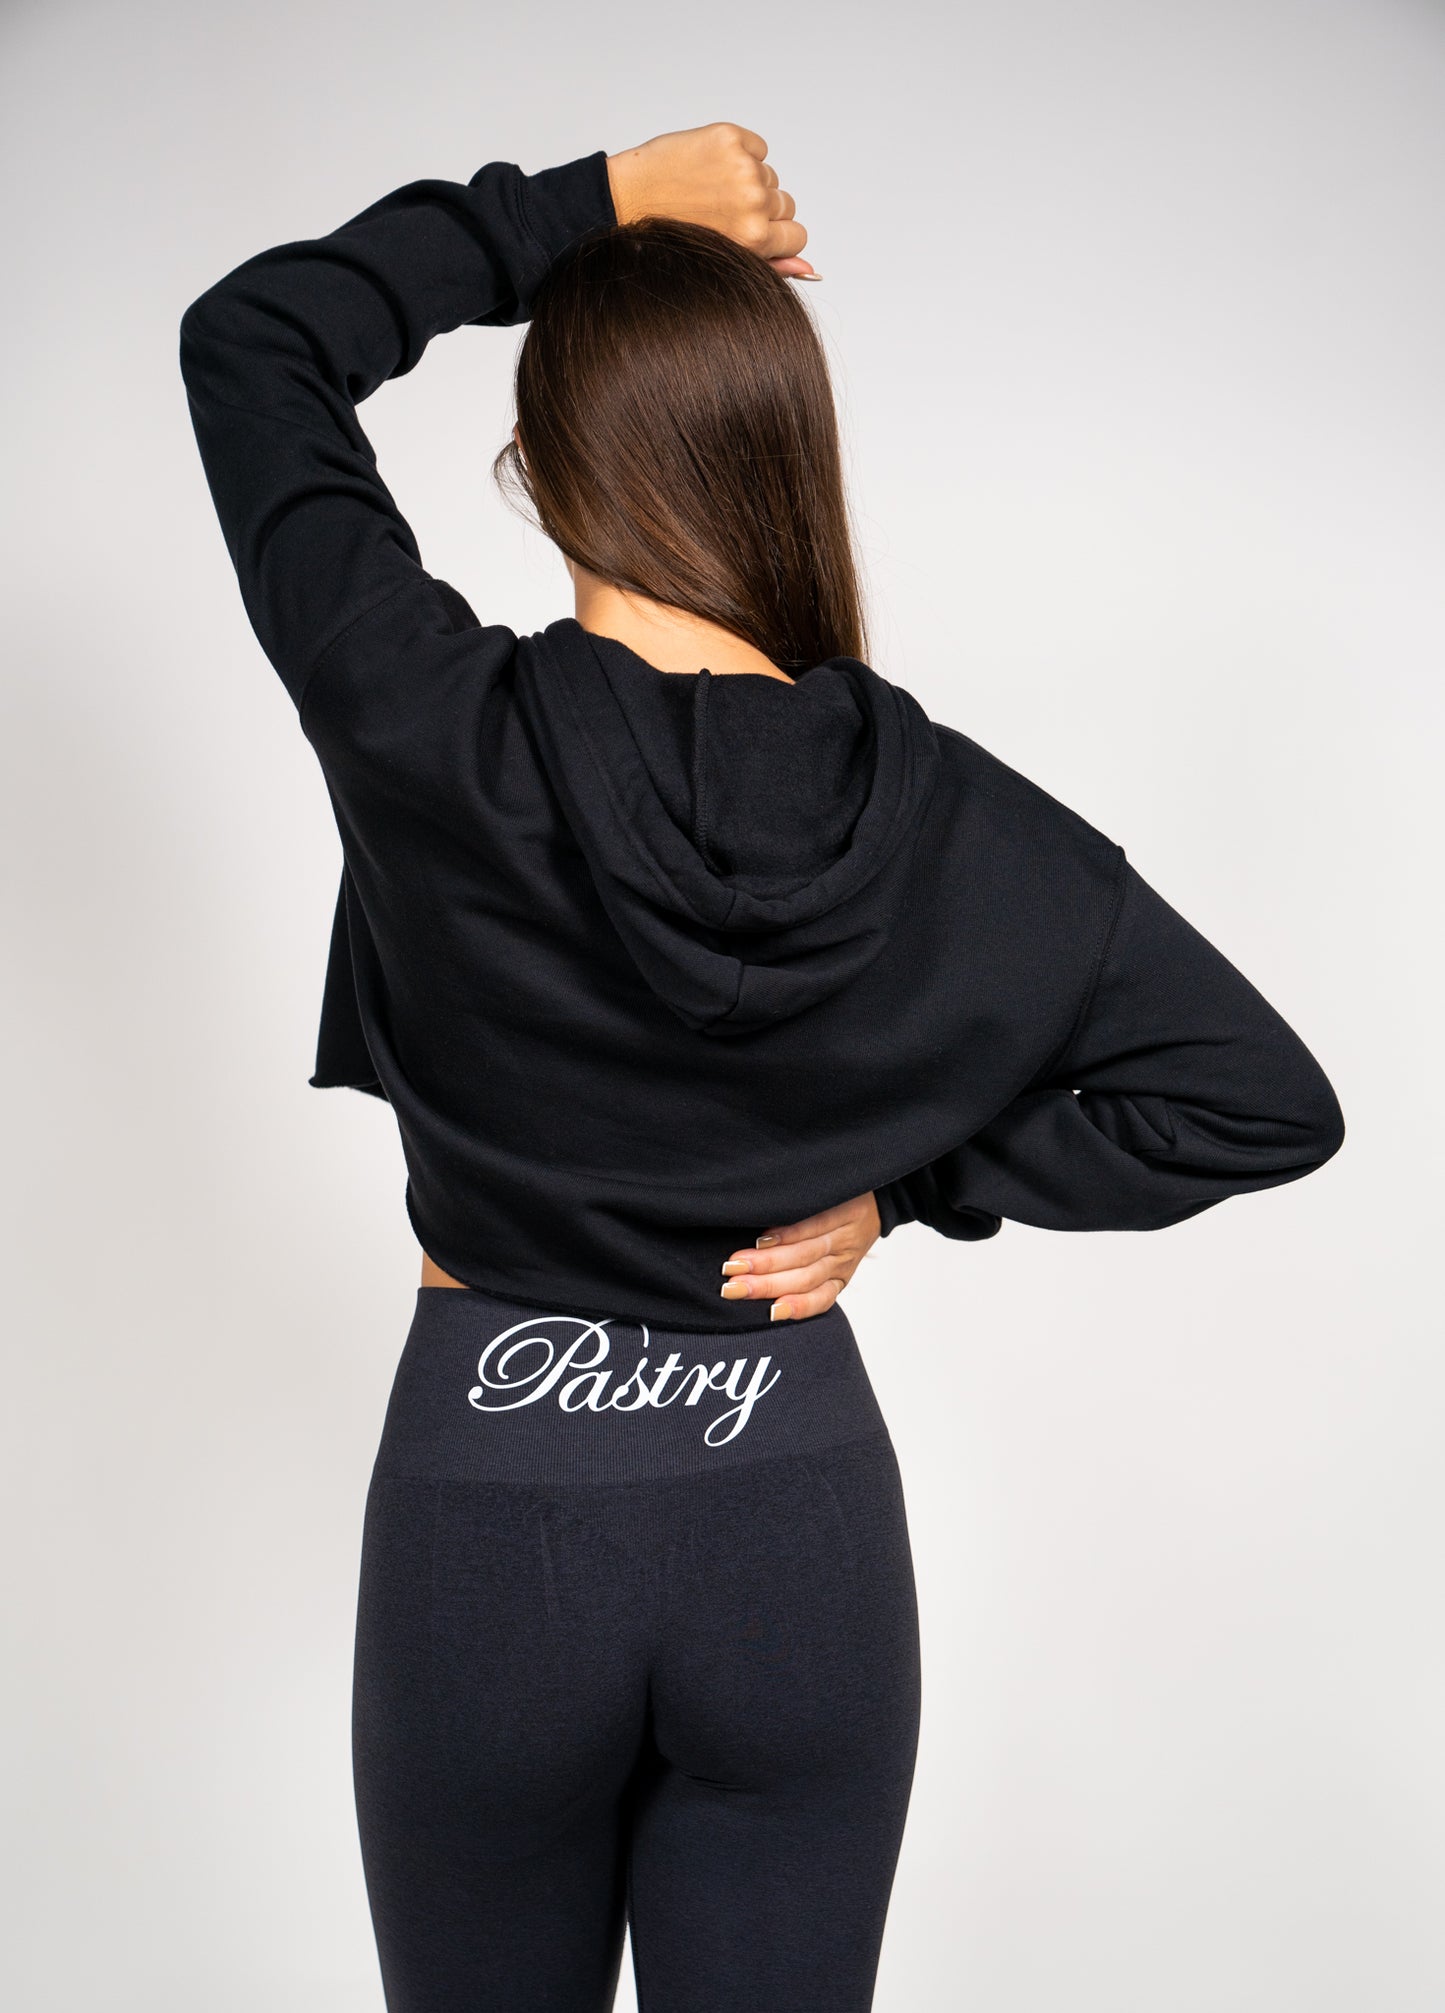 Pastry Cropped Hoodie Black with Neon Green Logo back view